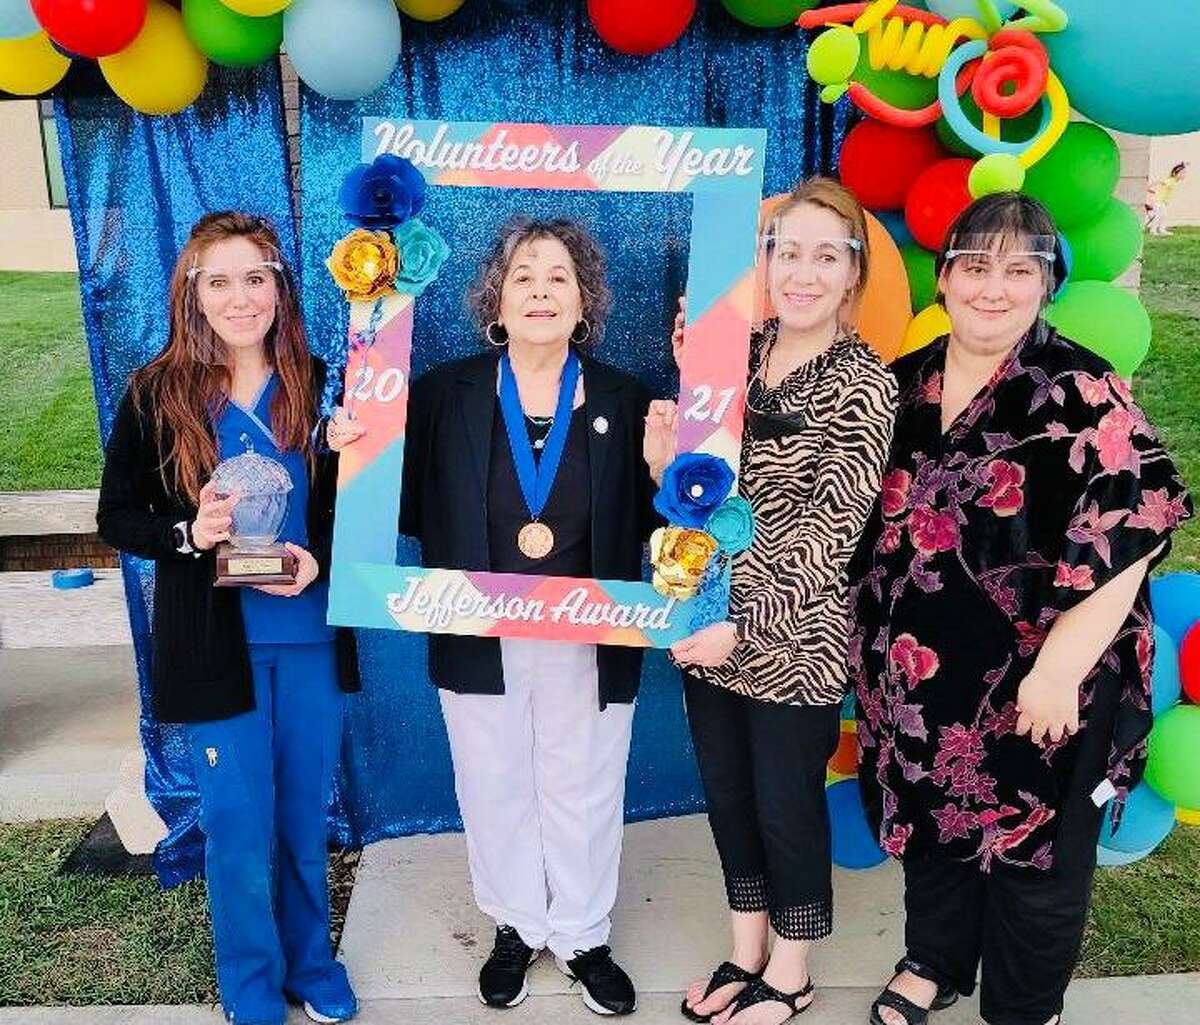 Diana Salinas Farias, a board member of the Laredo Animal Protective Society, was presented with the 2021 Jefferson Award presented by Multiplying Good, this weekend in a virtual event.